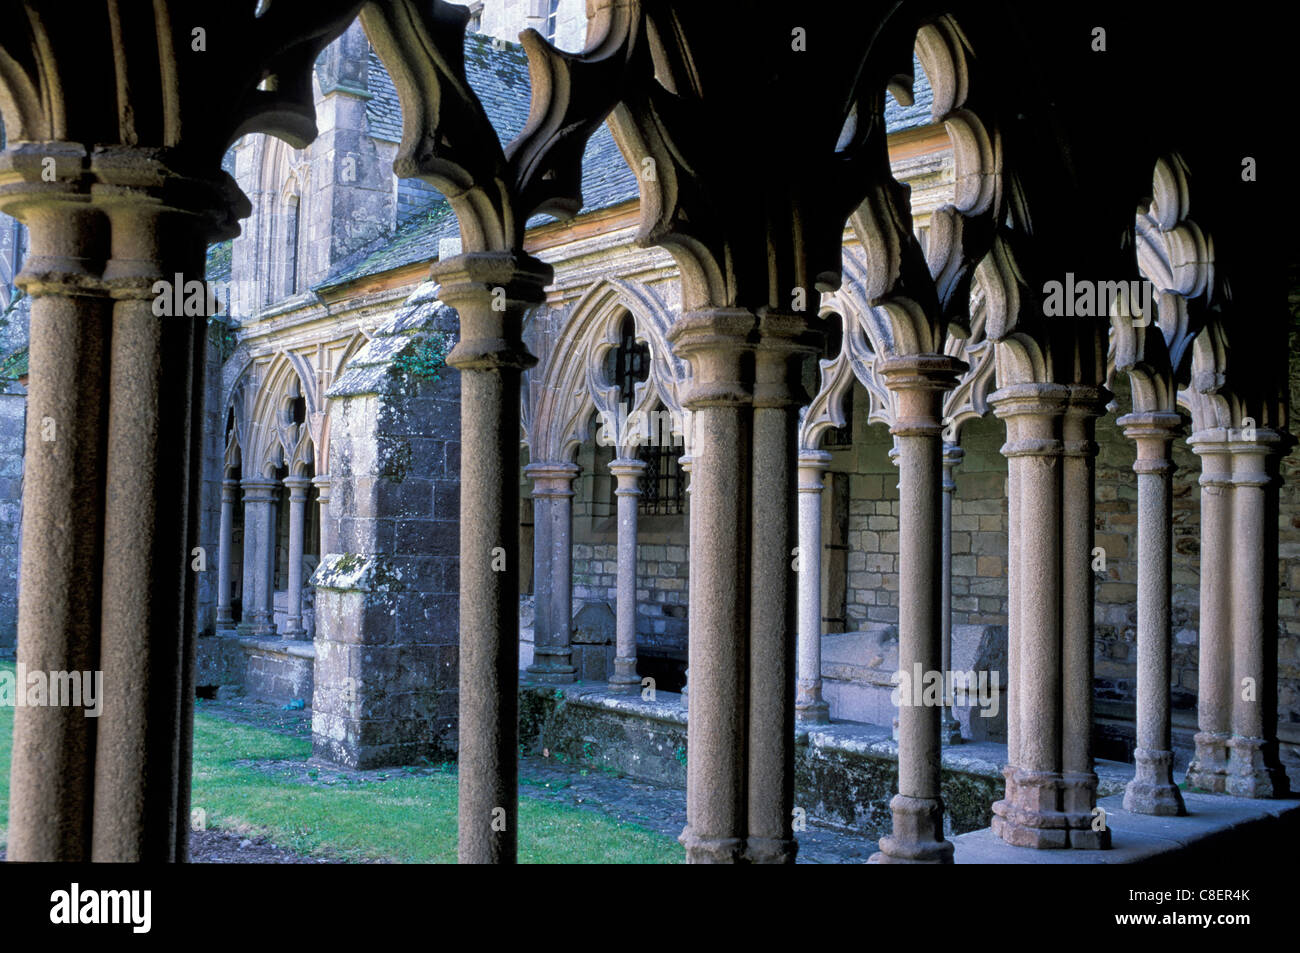 Cloitre, Cathedral, church, St. Tugdual, Treguier, Brittany, Bretagne, France, Europe, columns Stock Photo